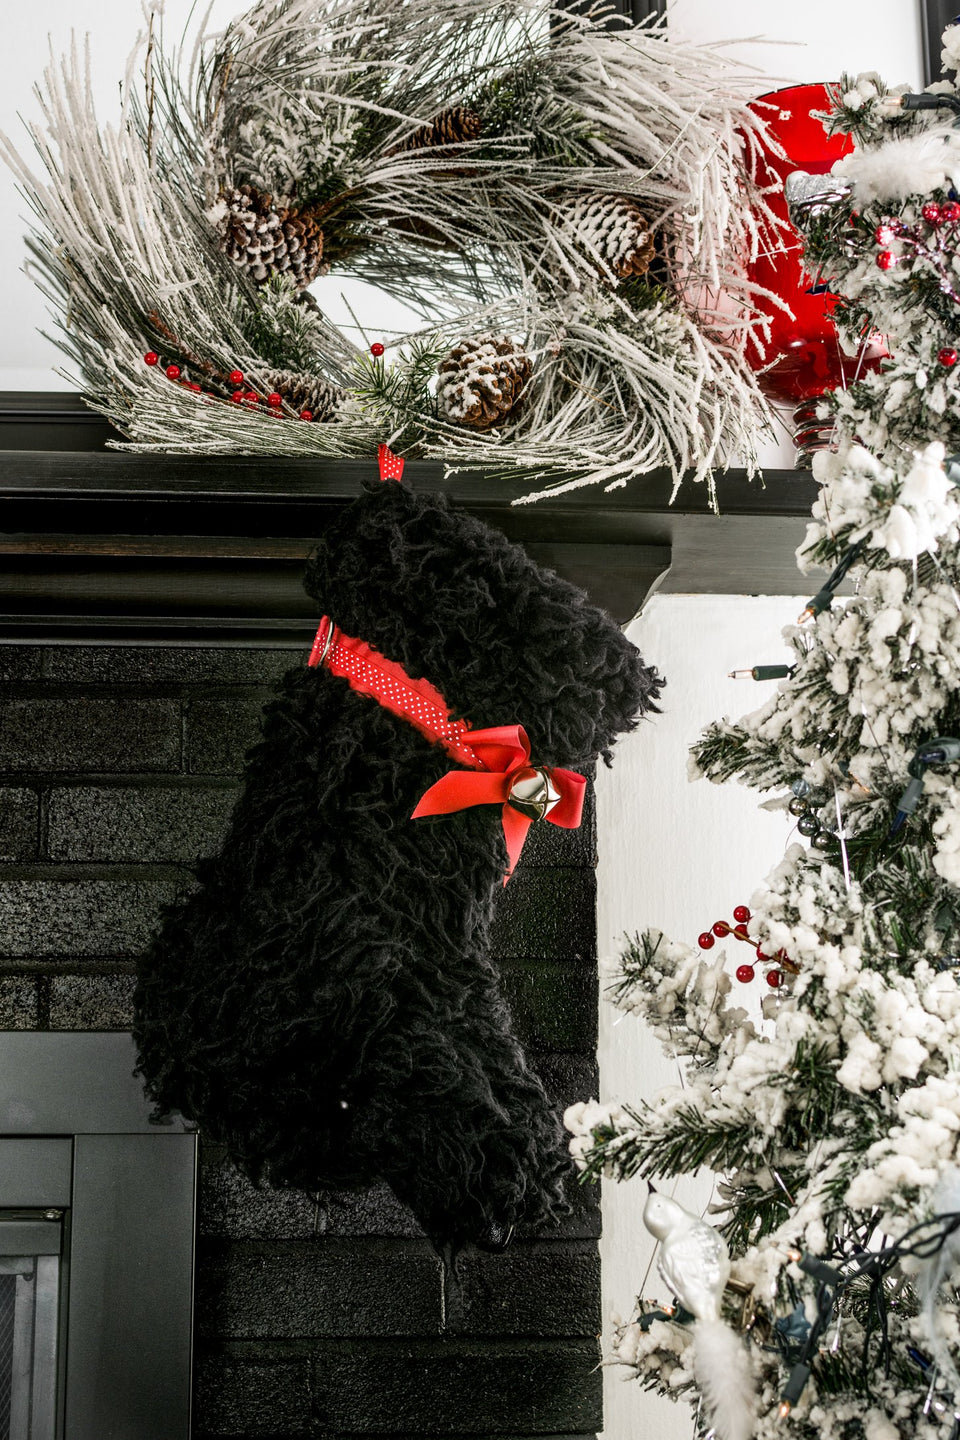 This black "Curly" Christmas dog stocking is inspired by our popular Doodle and it is the perfect gift for stuffing toys and treats into to spoil your fur baby for Christmas, or whatever holiday you celebrate!